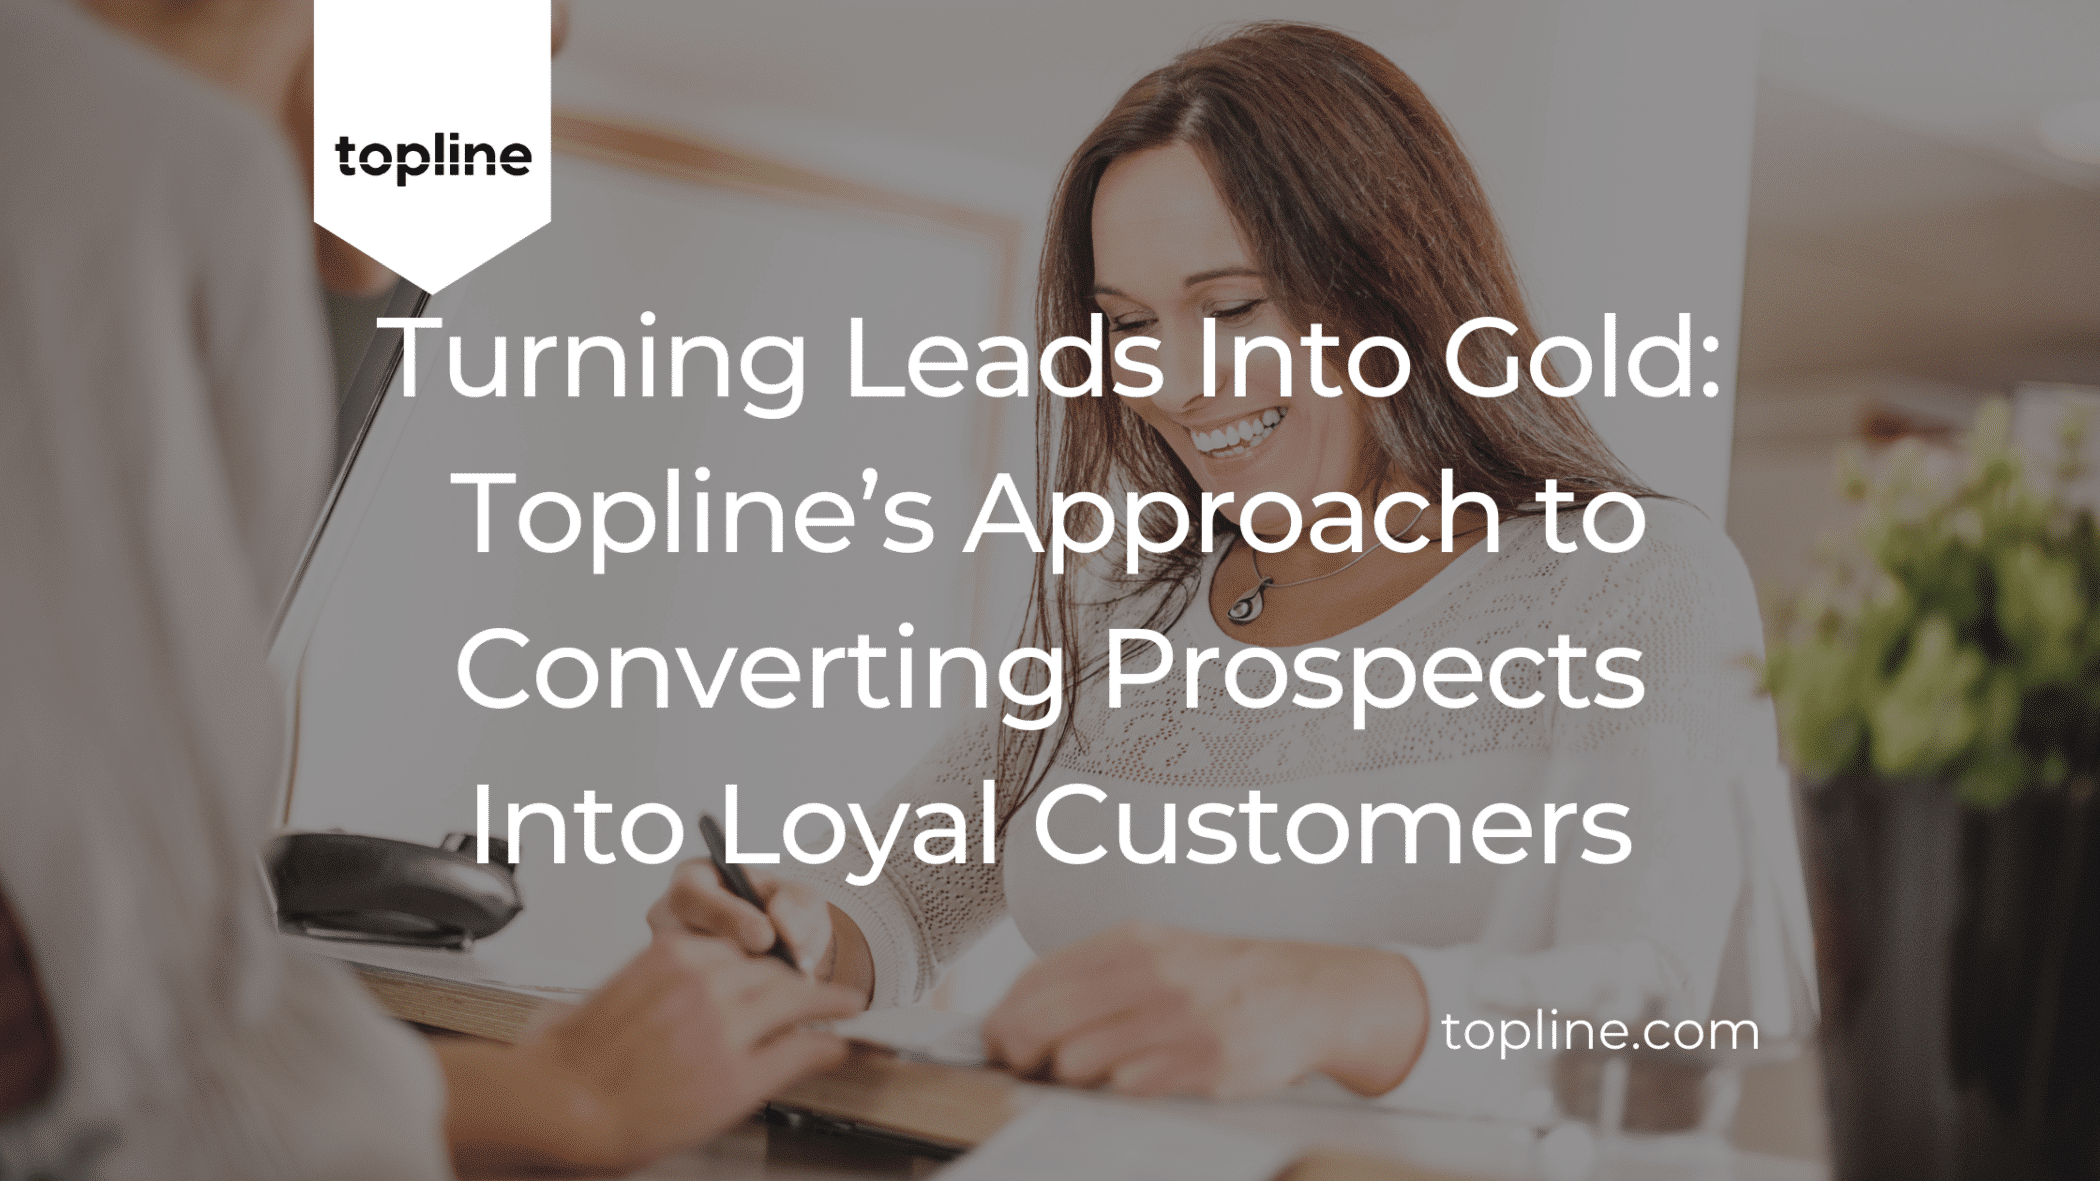 Turning Leads Into Gold: Topline’s Approach to Converting Prospects Into Loyal Customers